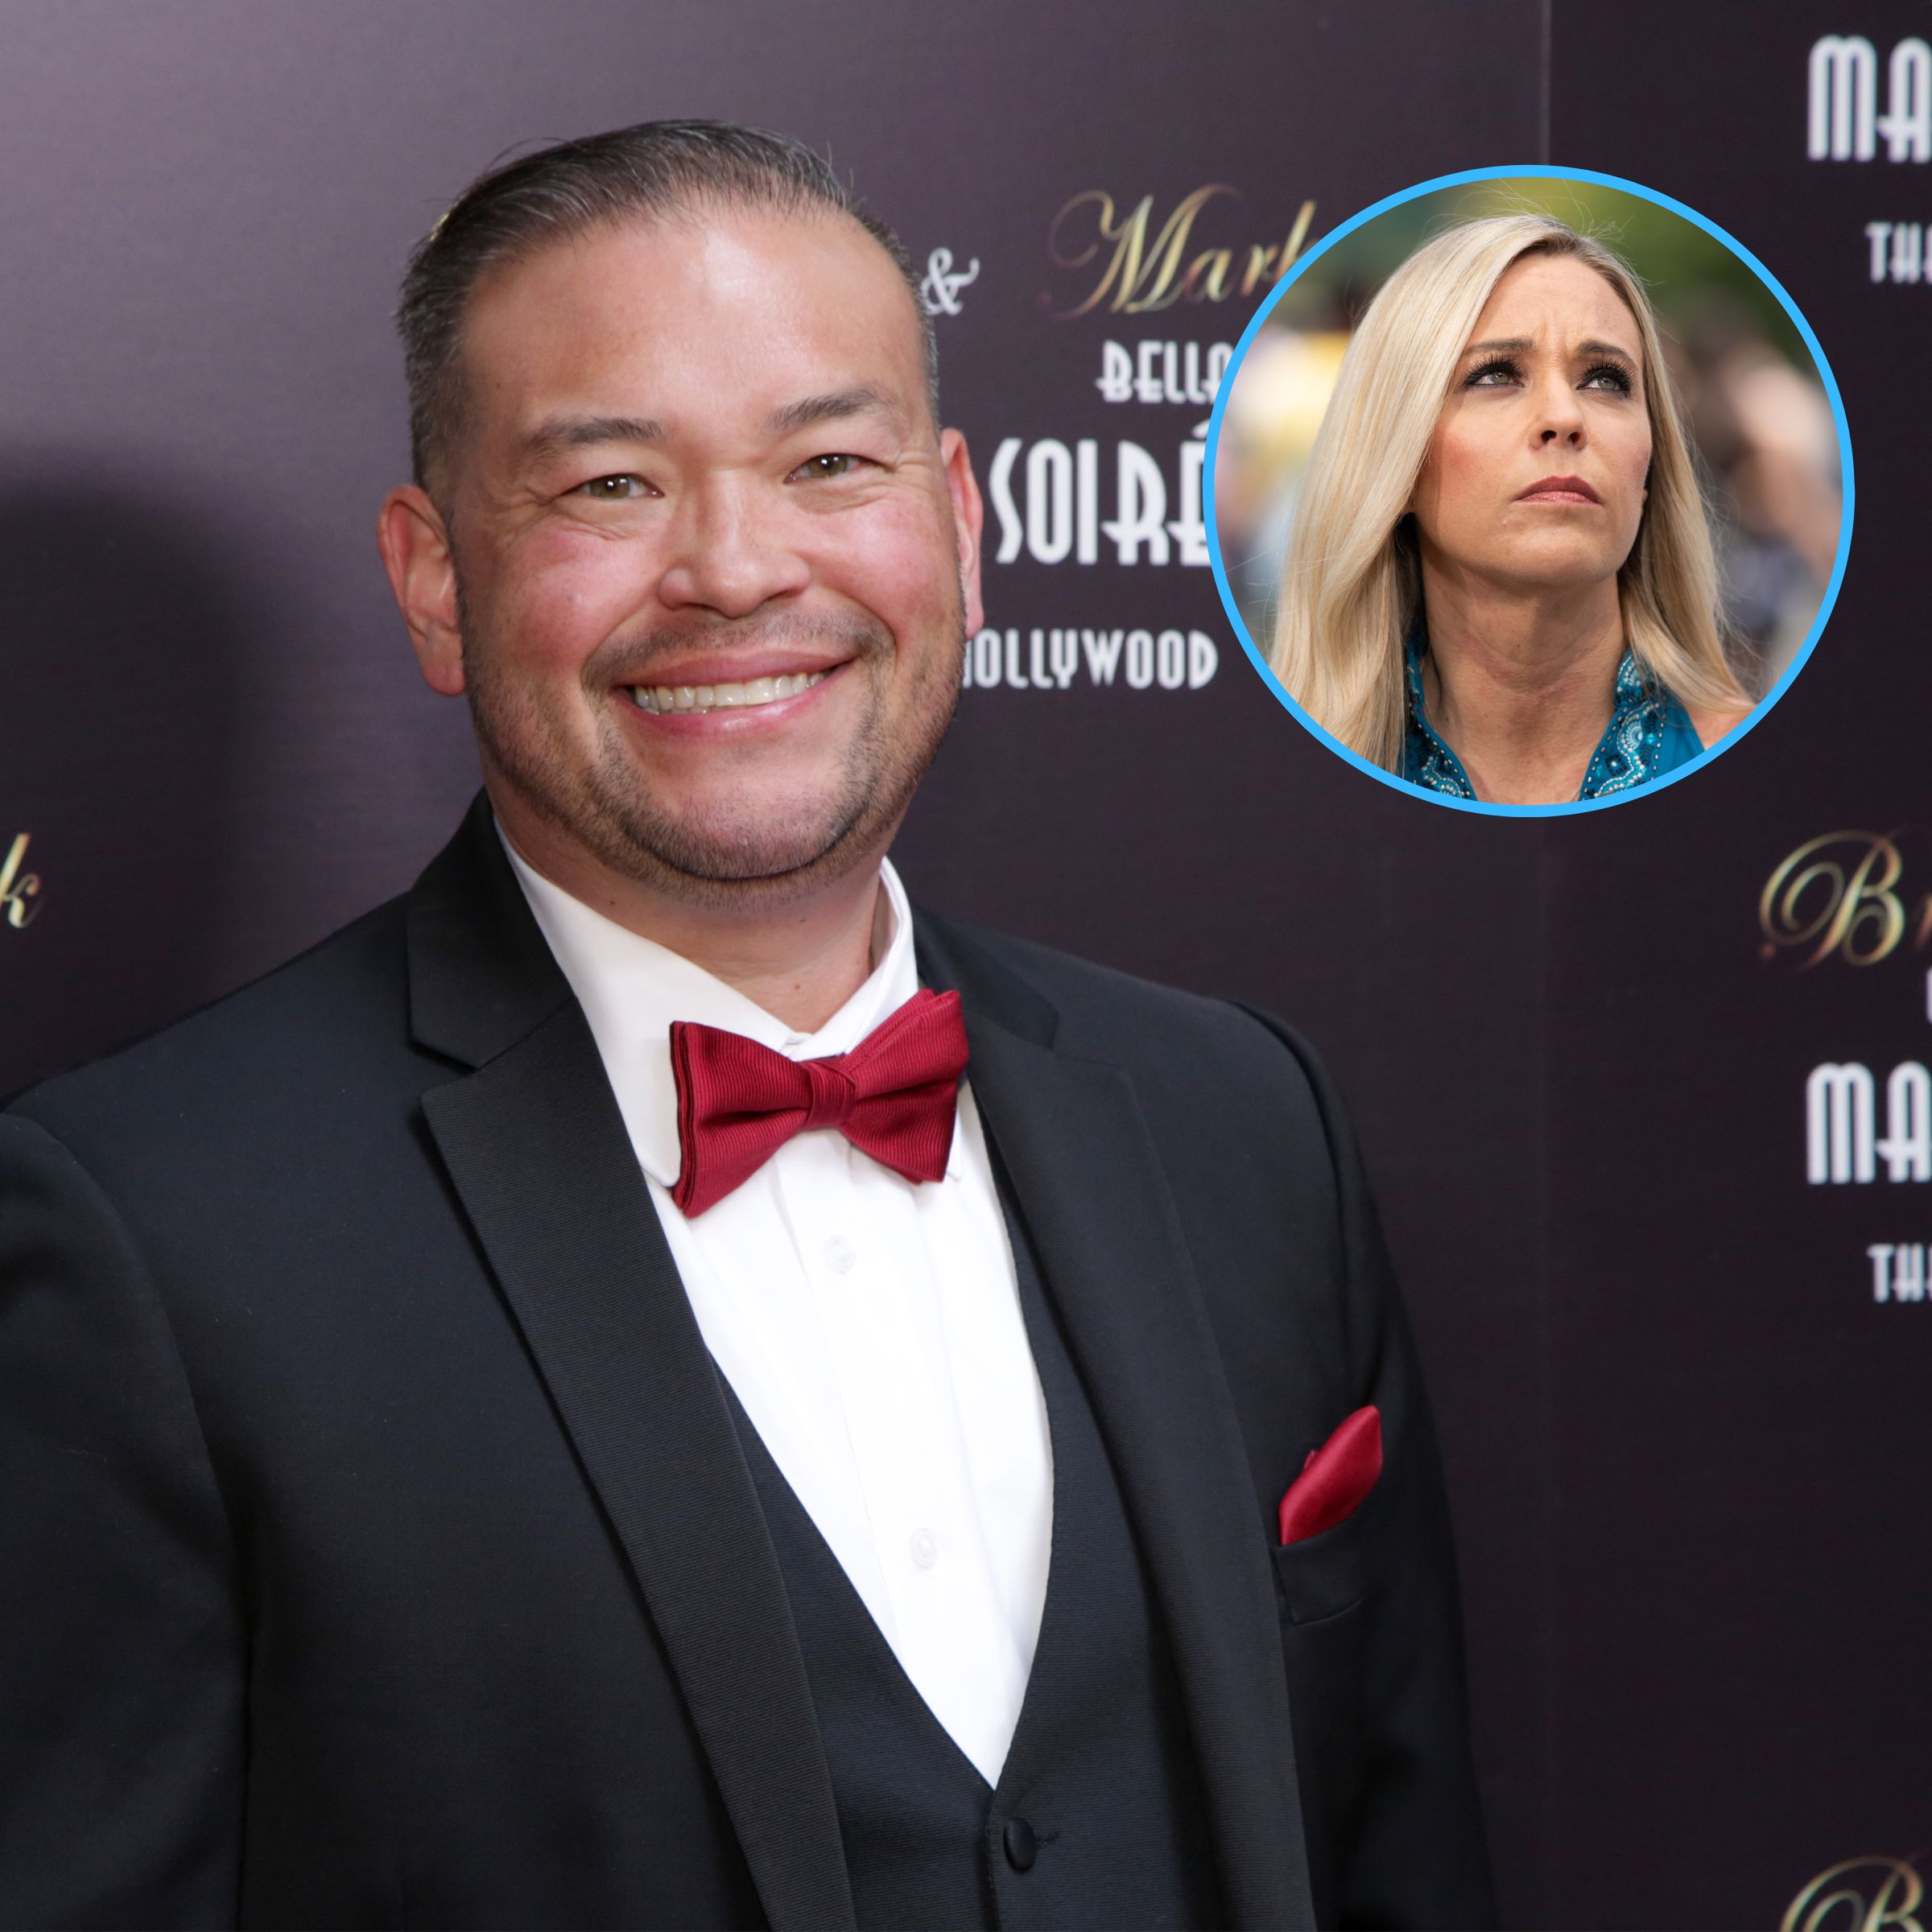 Jon Gosselin Reveals His Current Dynamic With Ex Kate: 'Kate Only Cares About Kate'